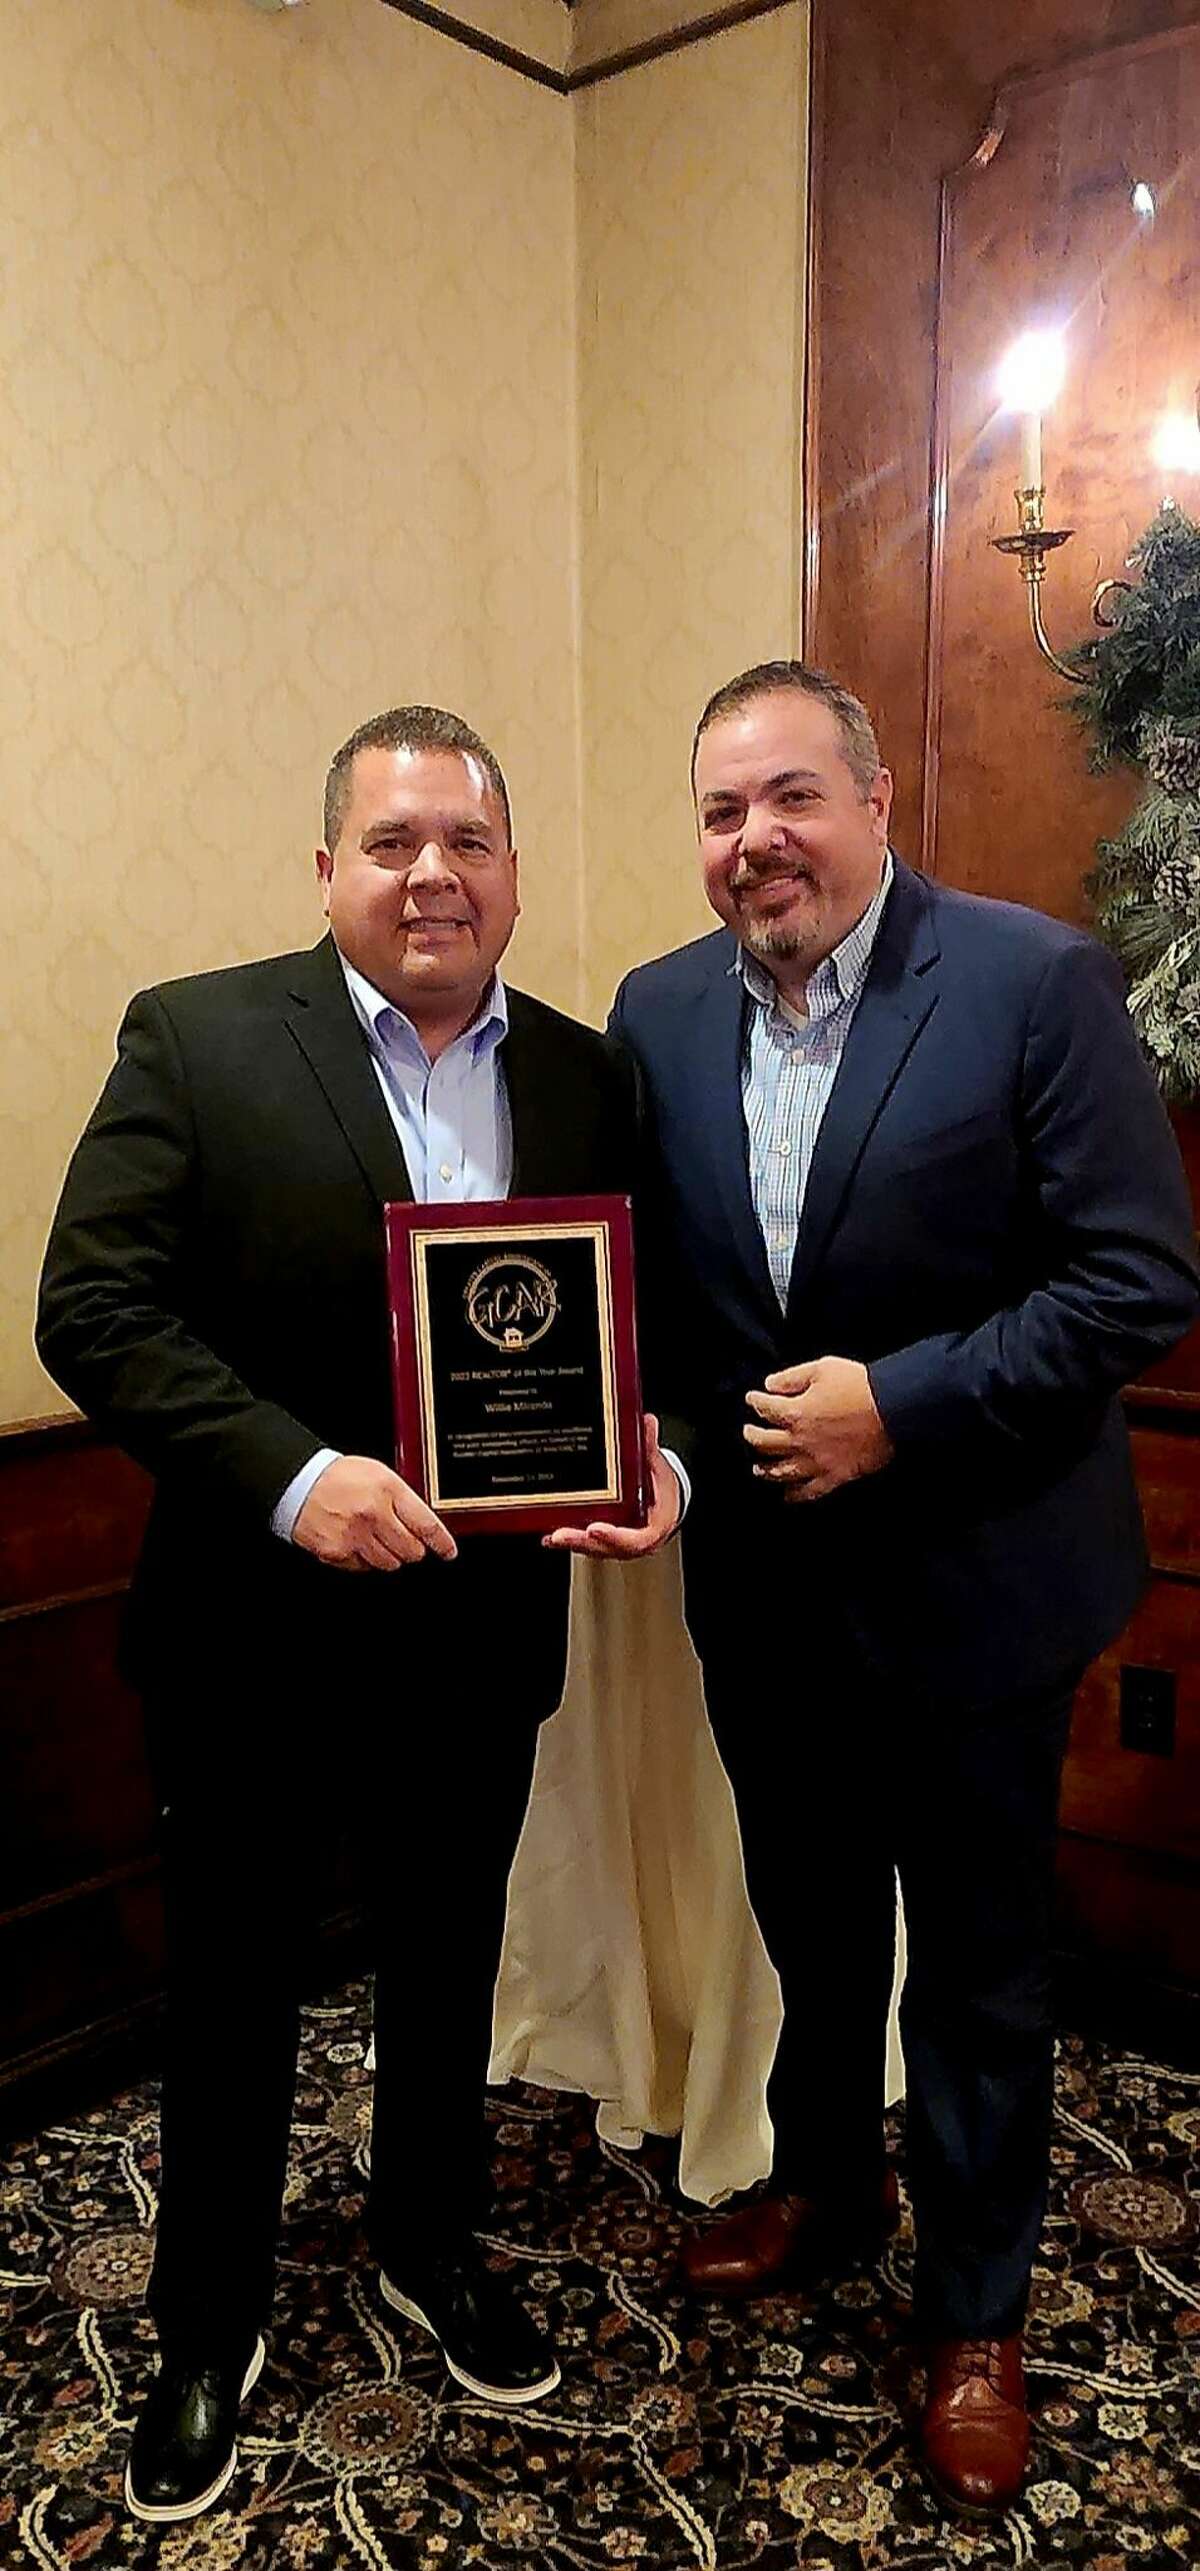 Willie Miranda, left, with Brian Miranda, both of Miranda Real Estate Group. Willie Miranda was given the 2022 Realtor of the Year award from the Greater Capital Association of Realtors.